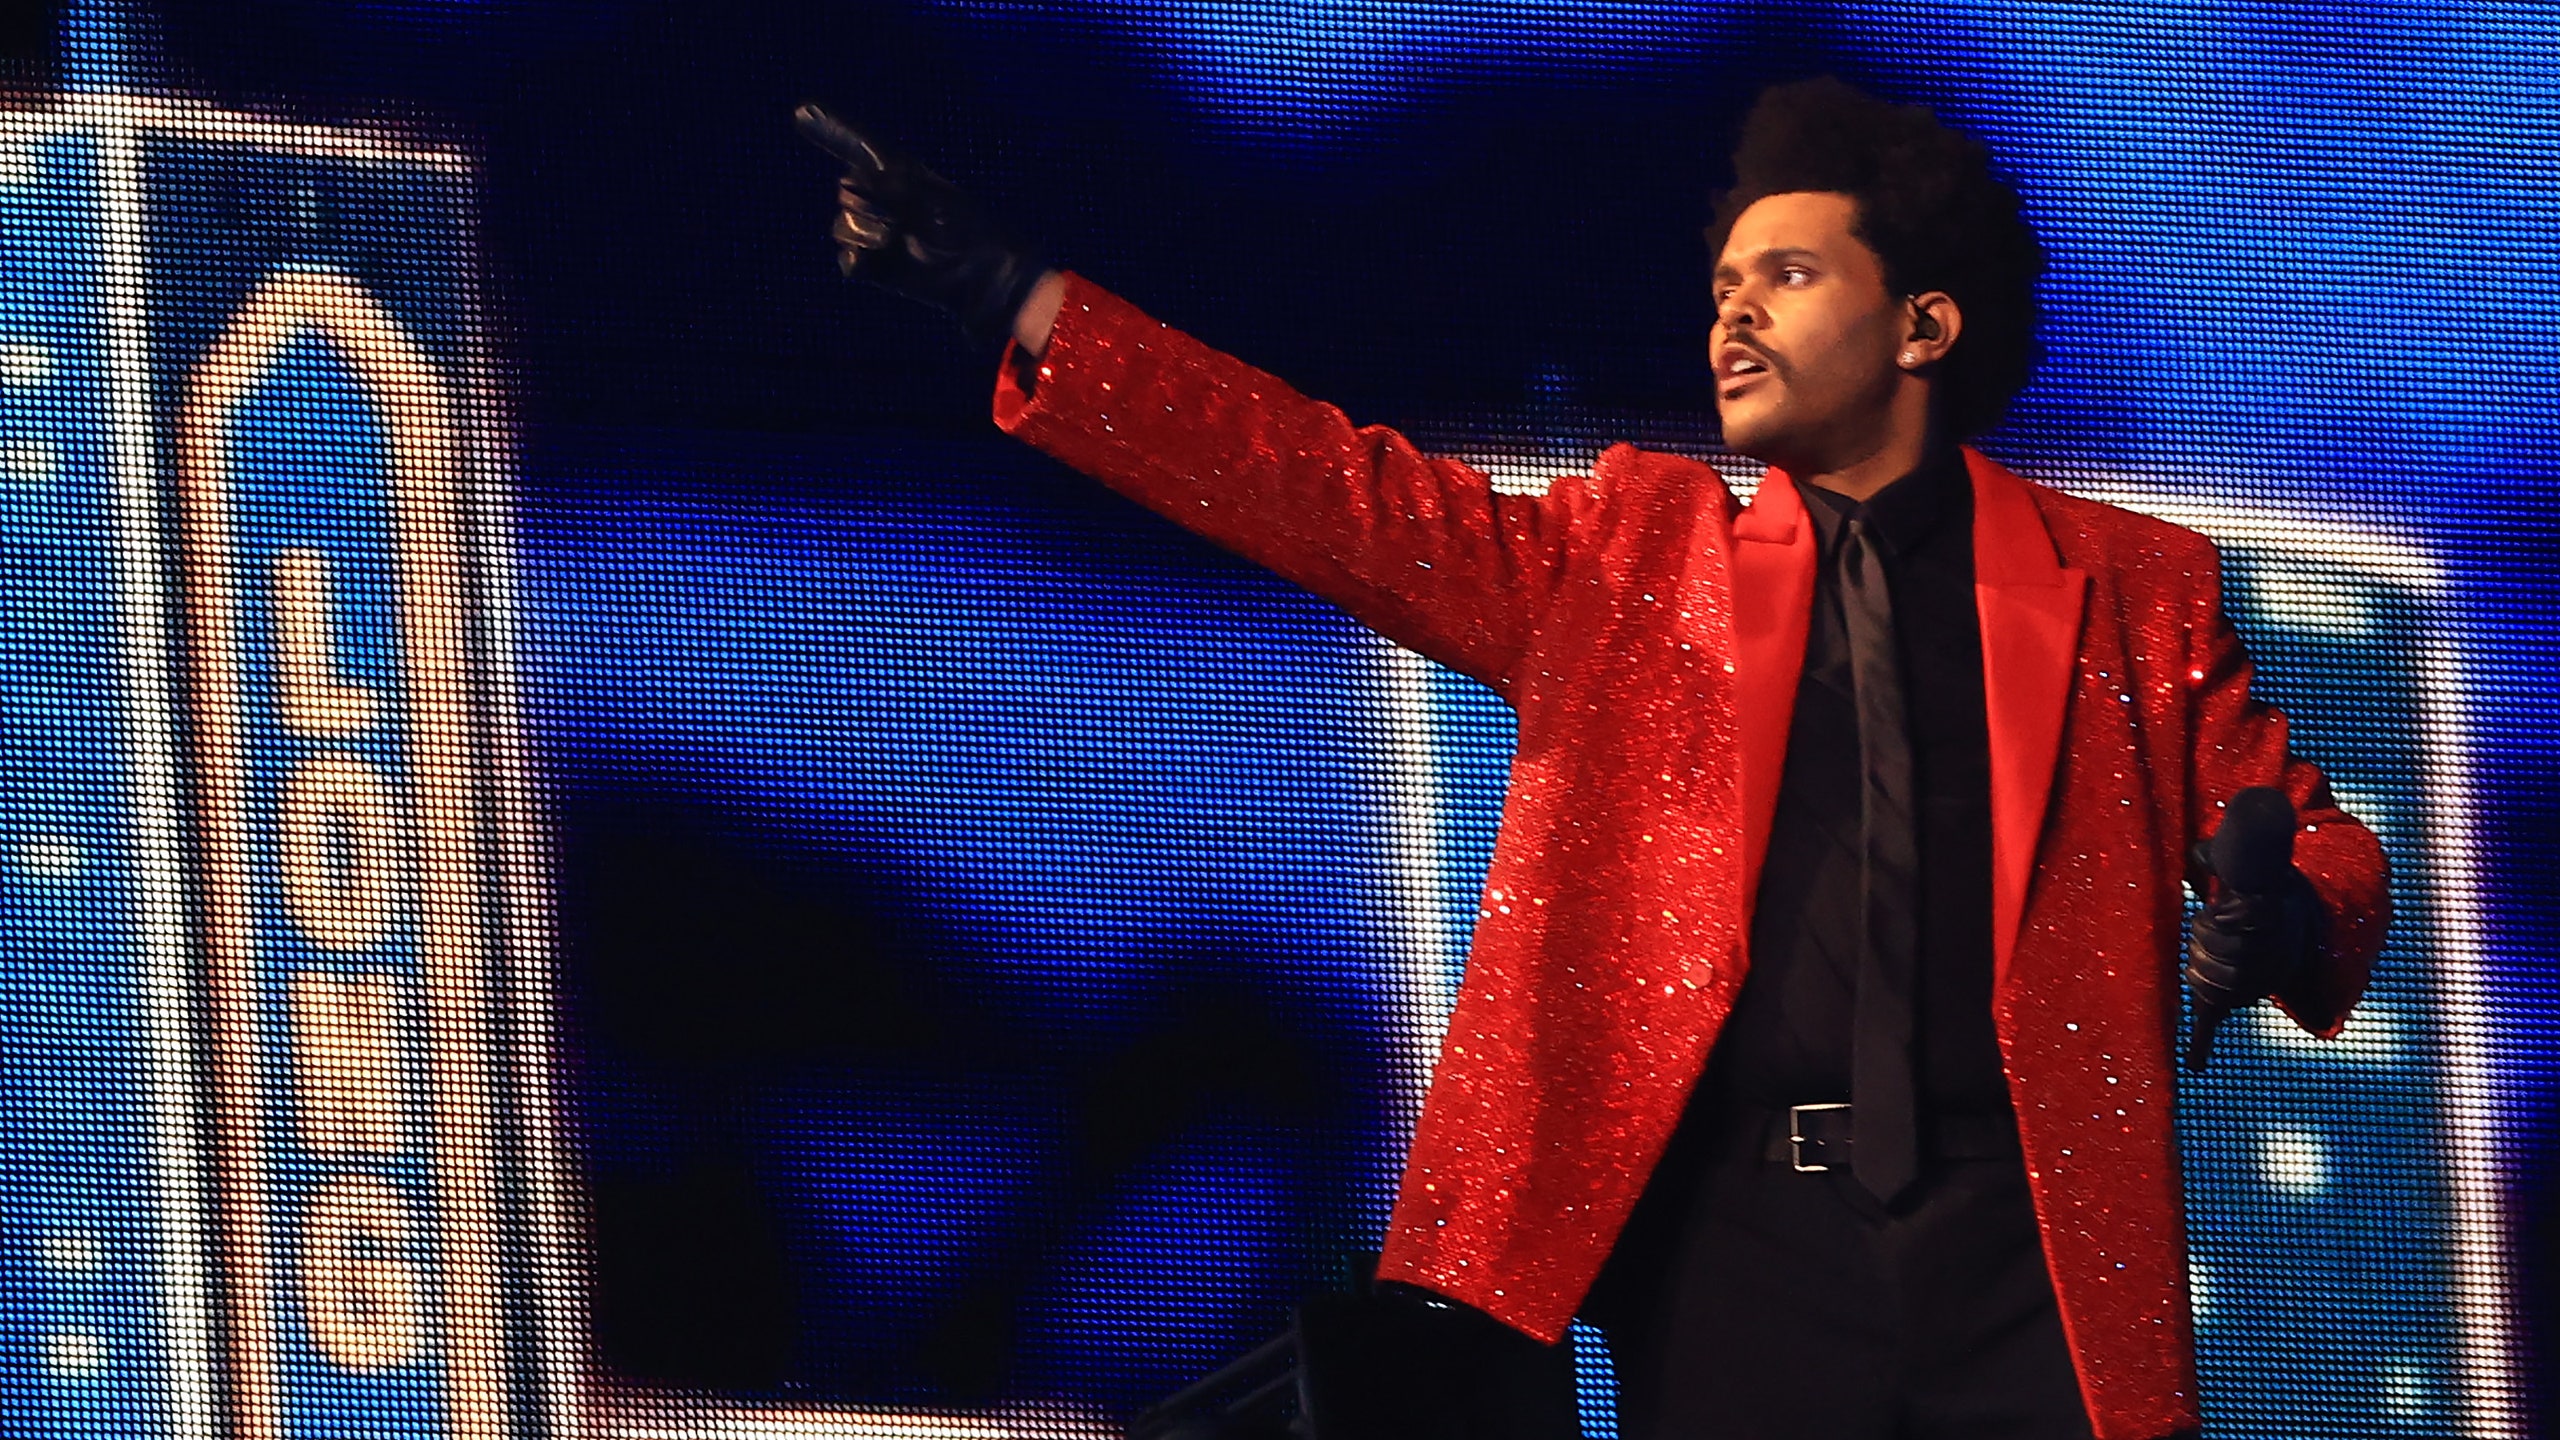 The Weeknd’s Performance Triggers Social Media Users